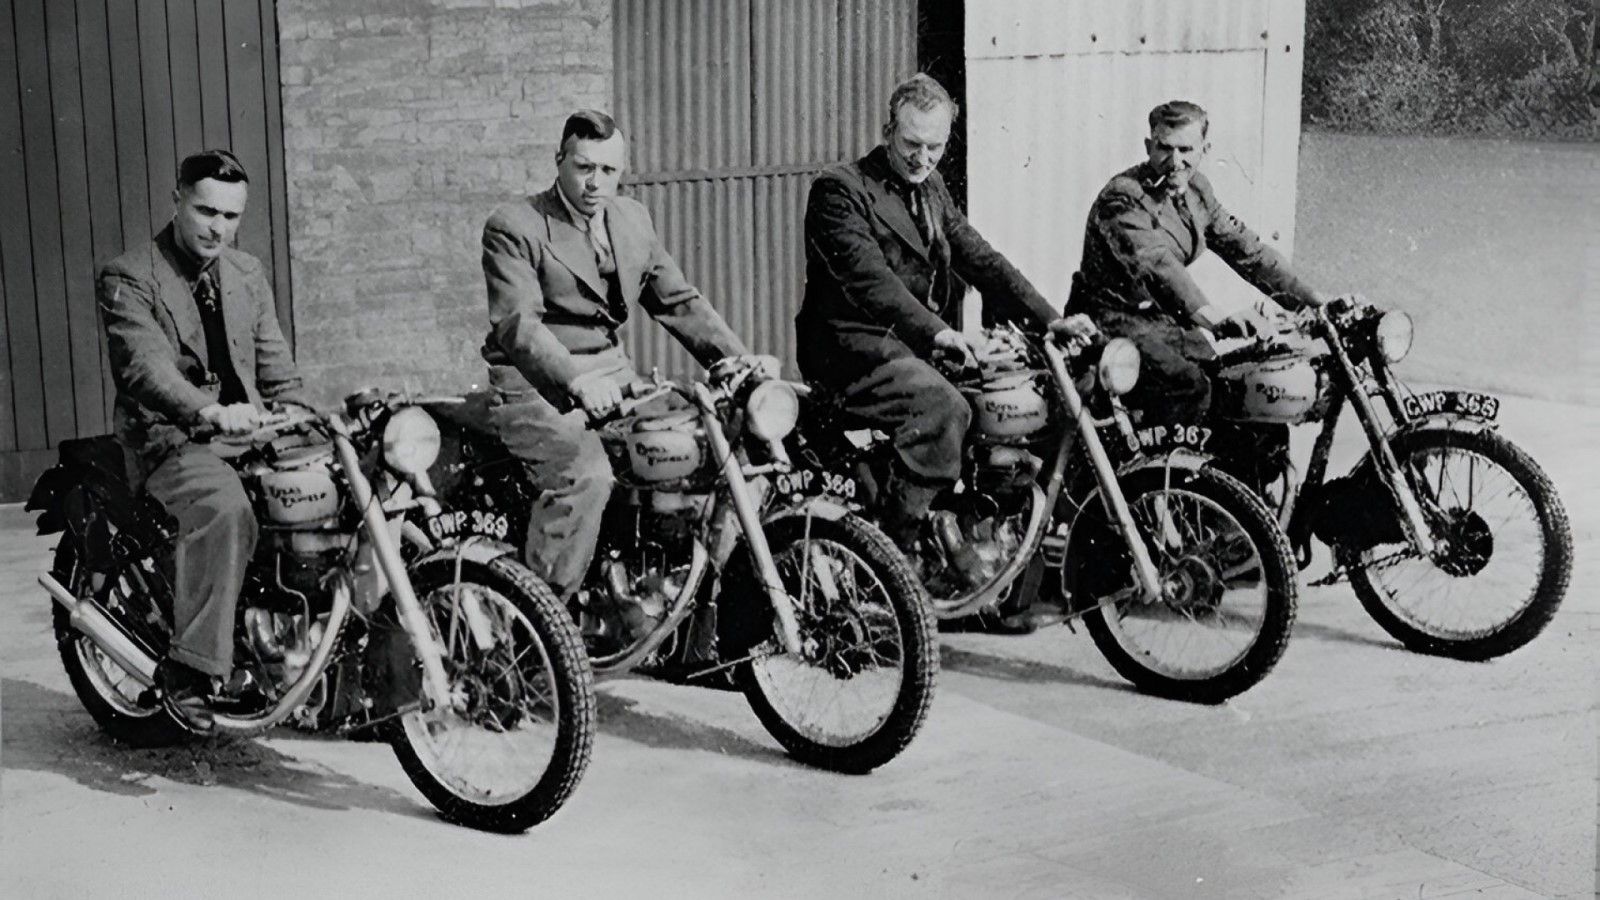 1948 ISDT Successful Royal Enfield Team photo